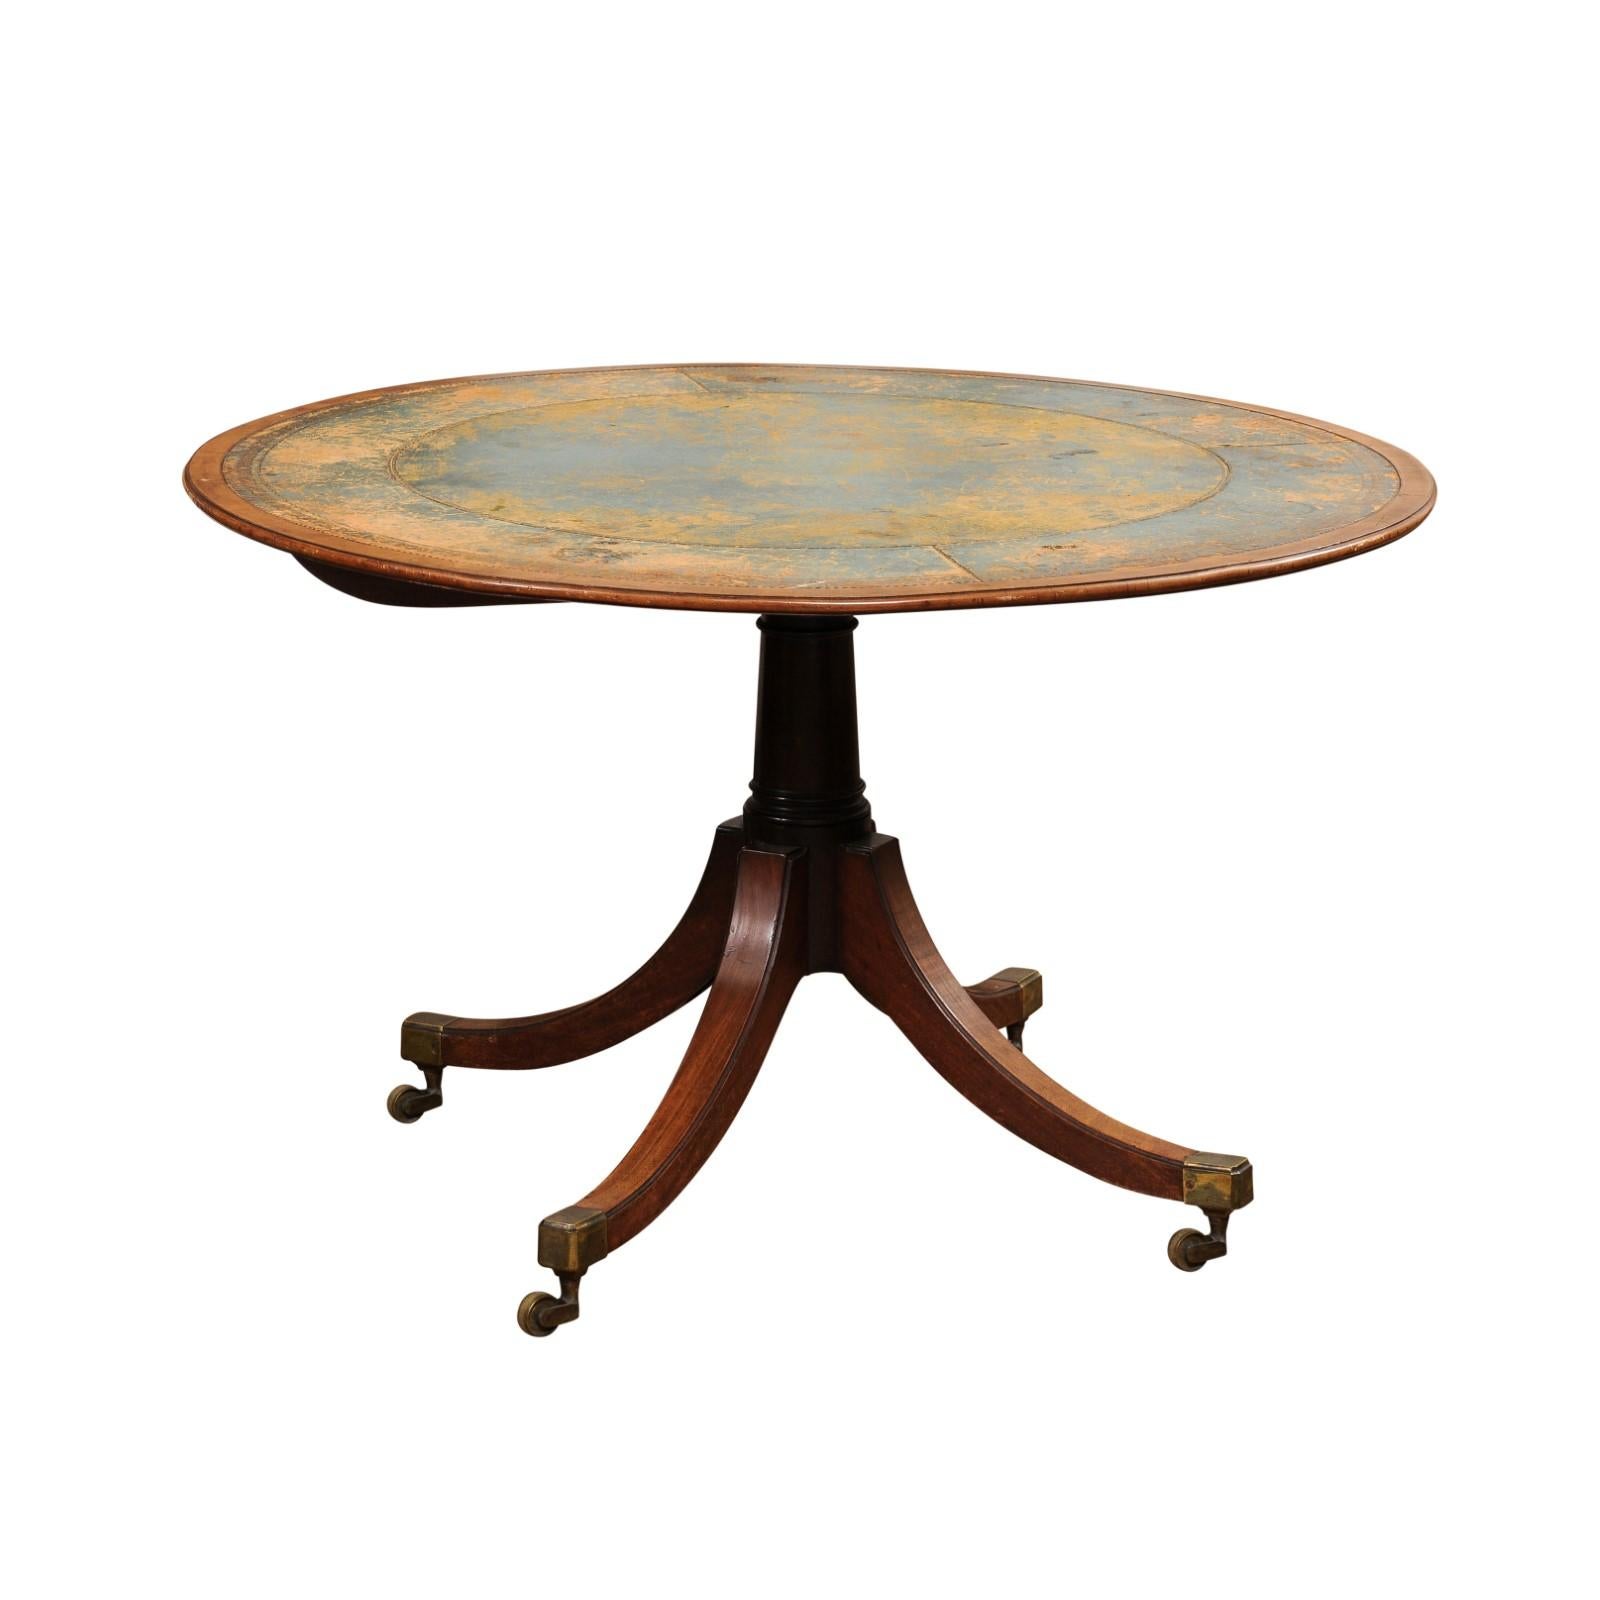 An English Turn of the Century mahogany and leather tilt top centre table with quadripod base and casters. Step into the allure of a bygone era with this exquisite Turn of the Century English tilt-top table, a piece that marries the rich warmth of